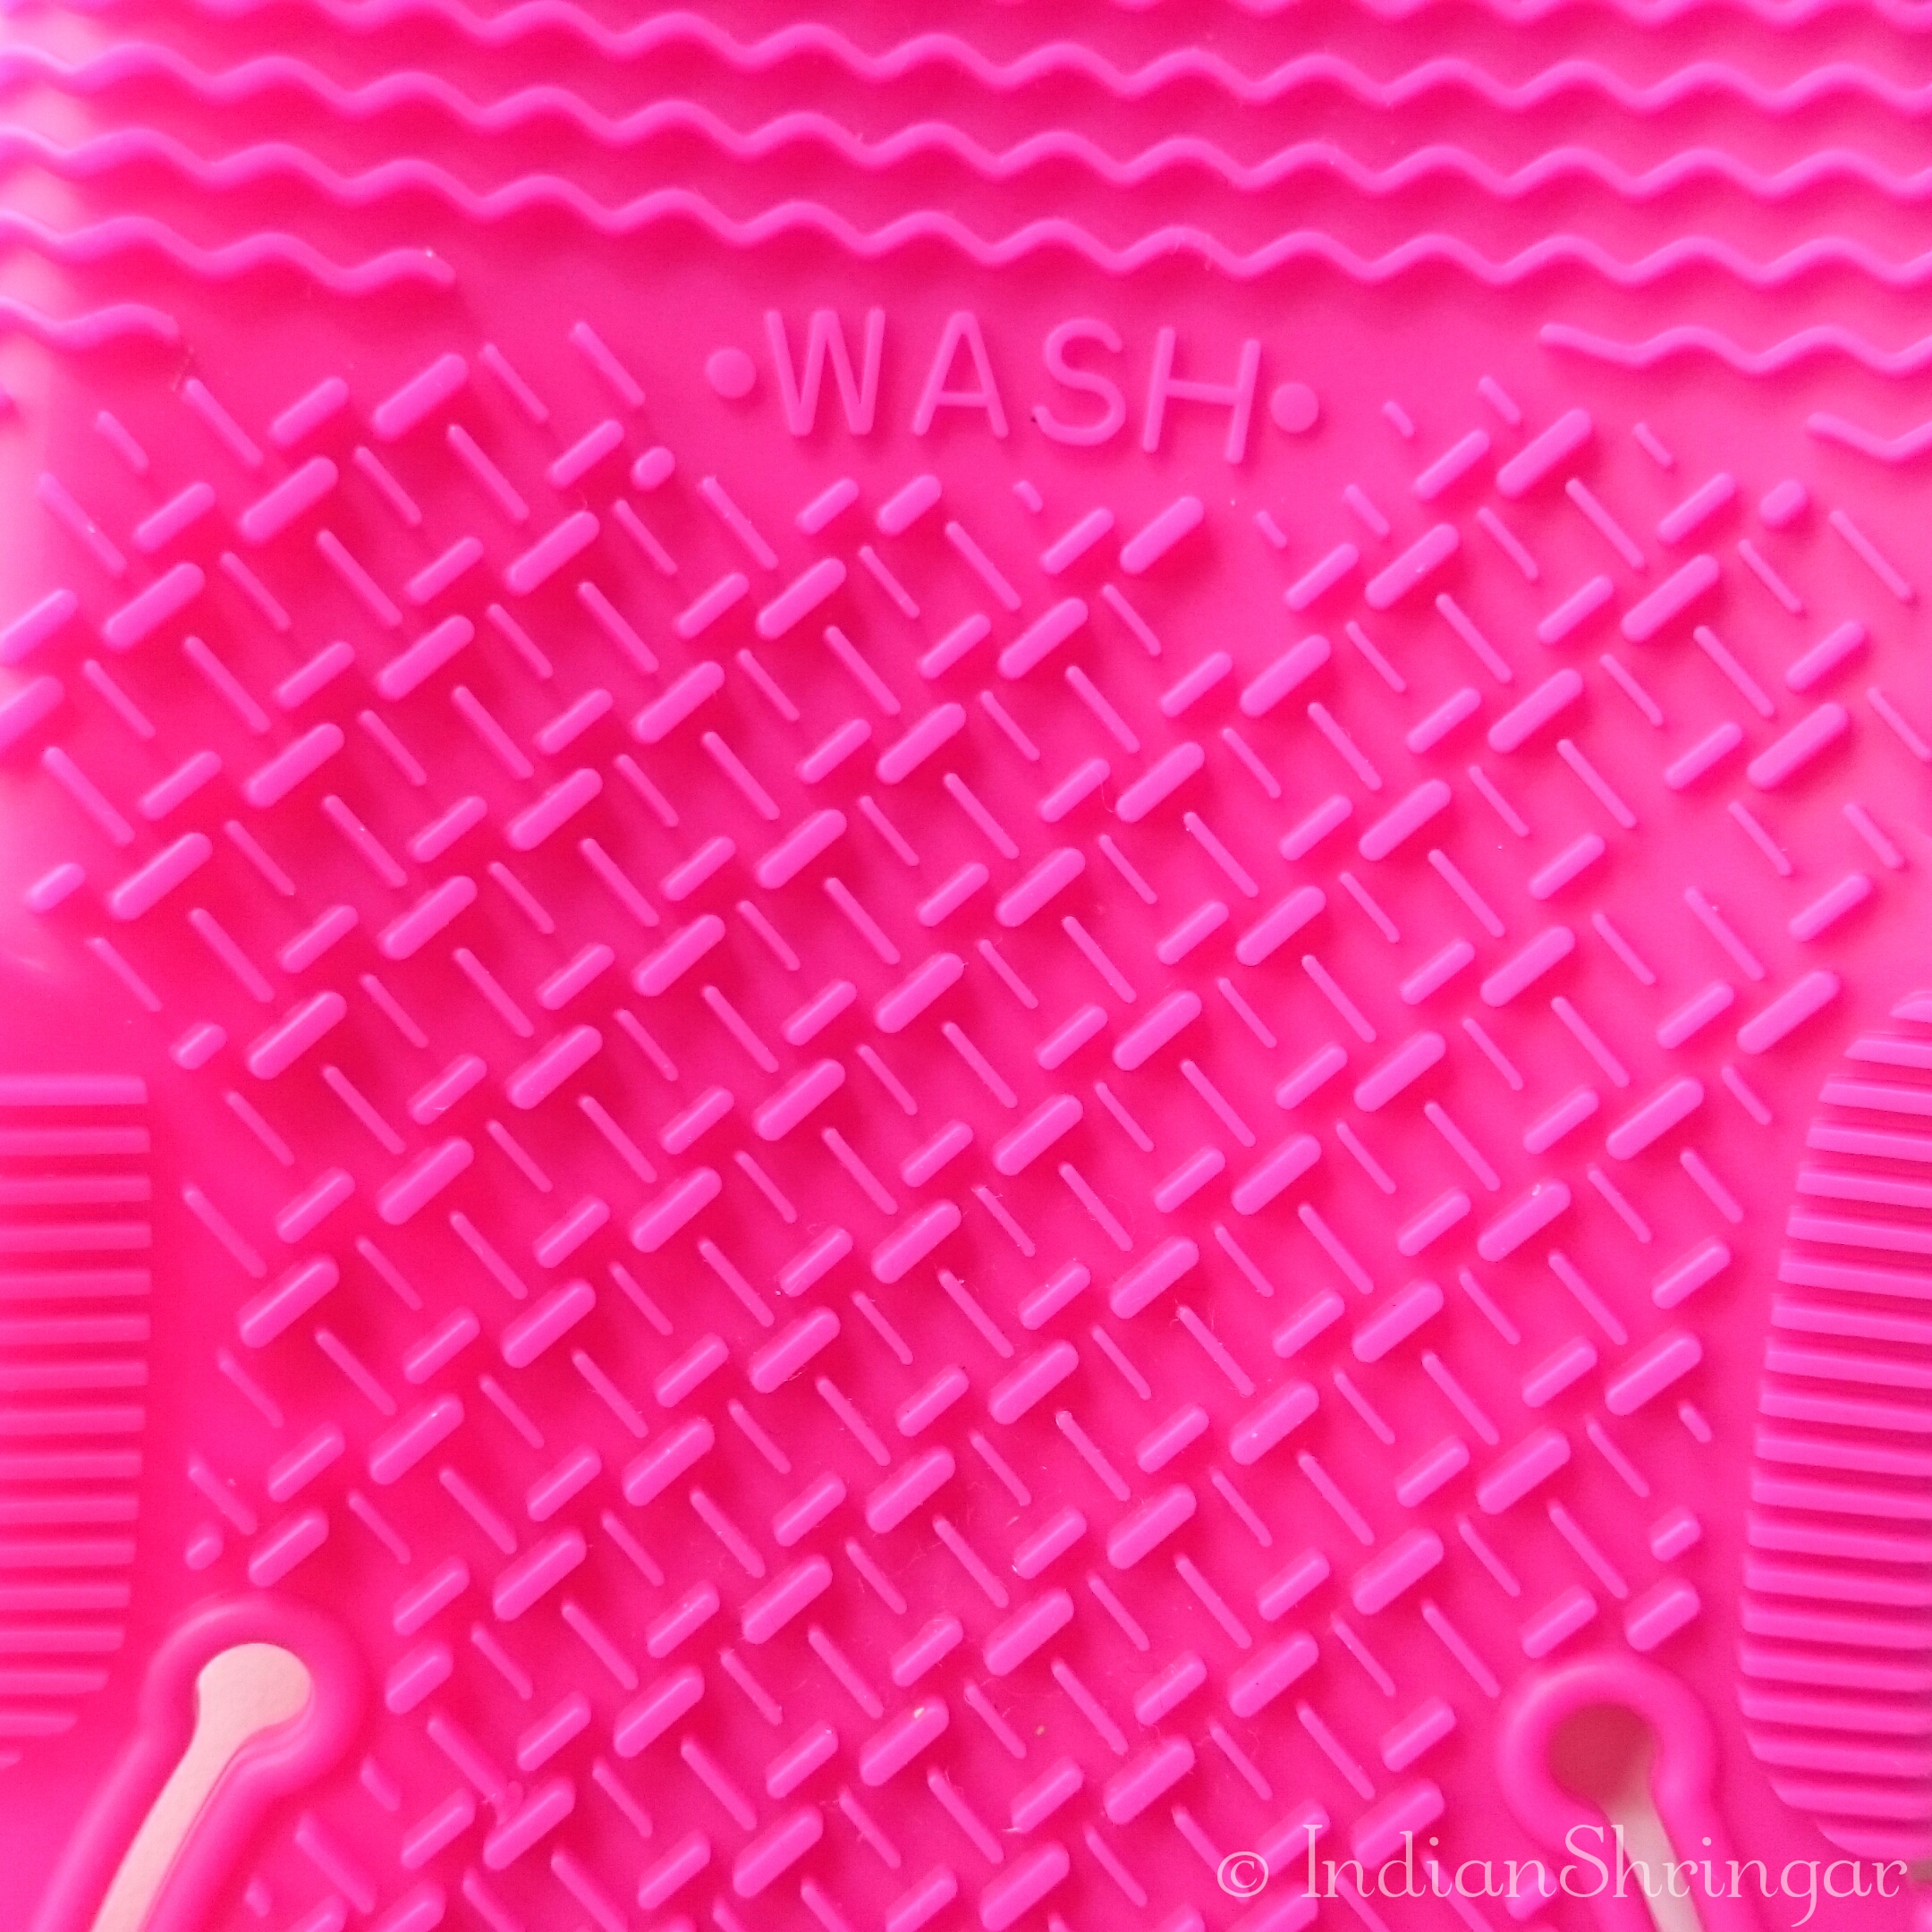 Sigma Spa Express Brush Cleaning Glove Review